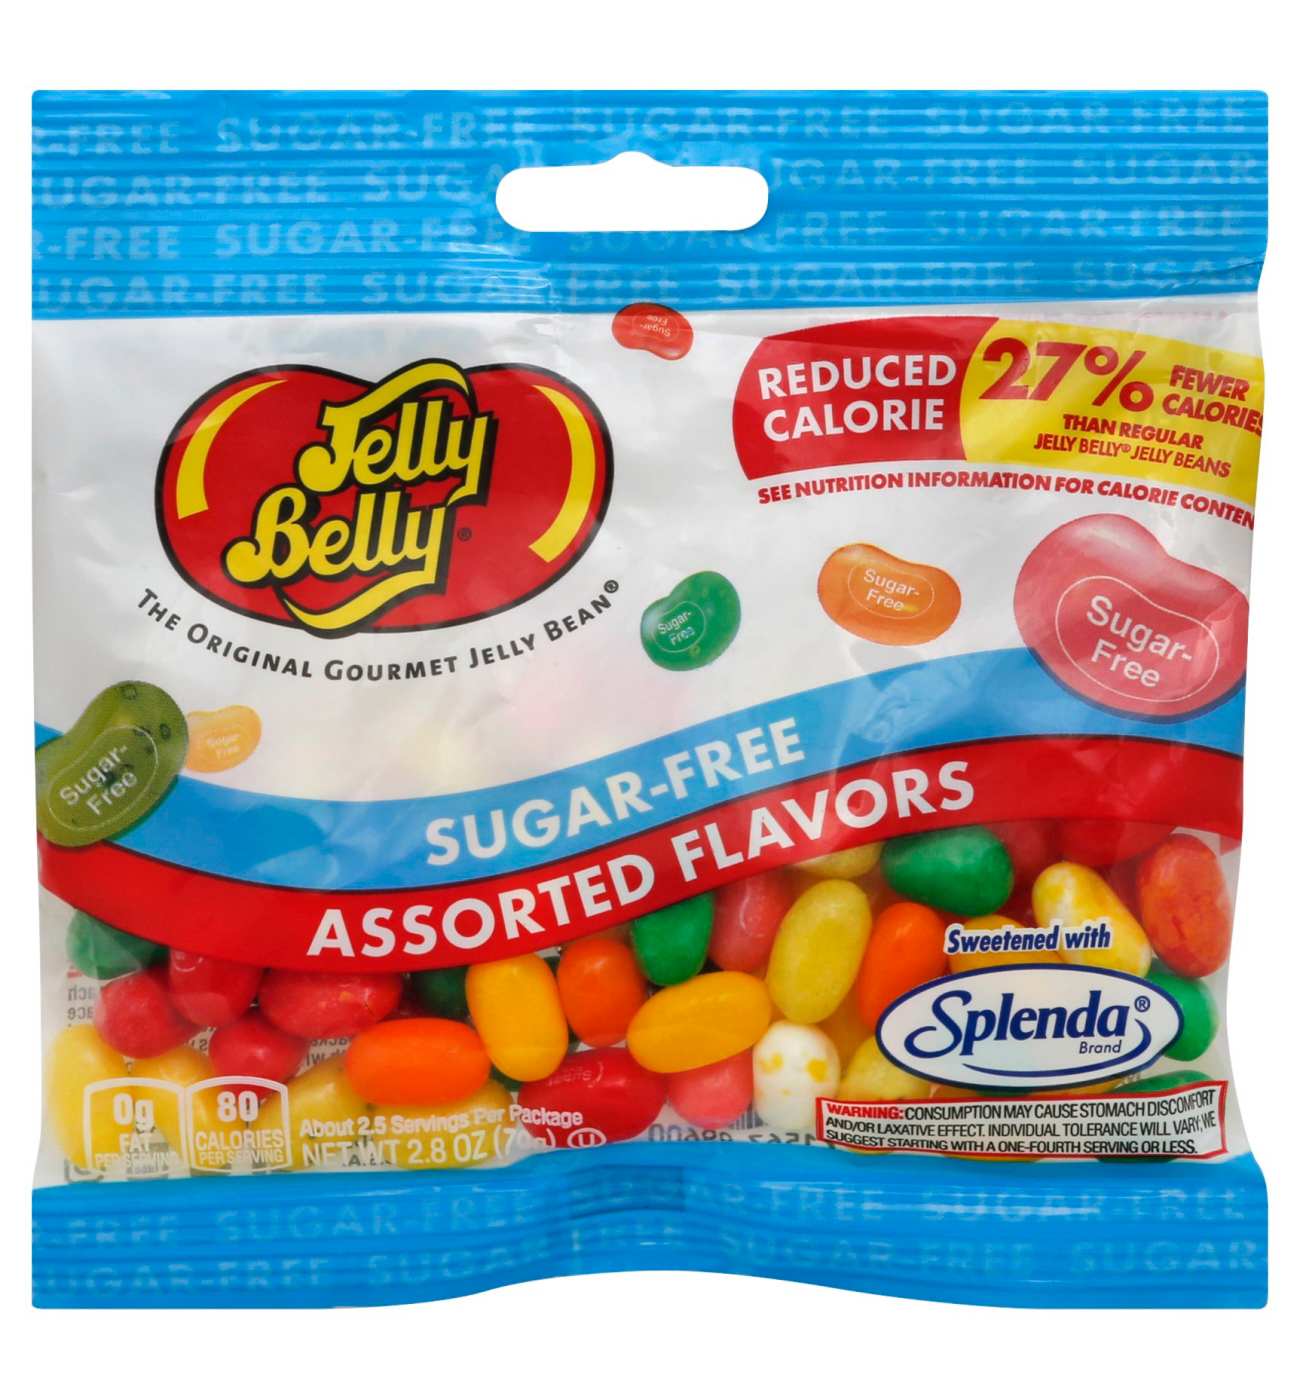 Jelly Belly Sugar Free Assorted Flavors Jelly Beans - Shop Candy at H-E-B